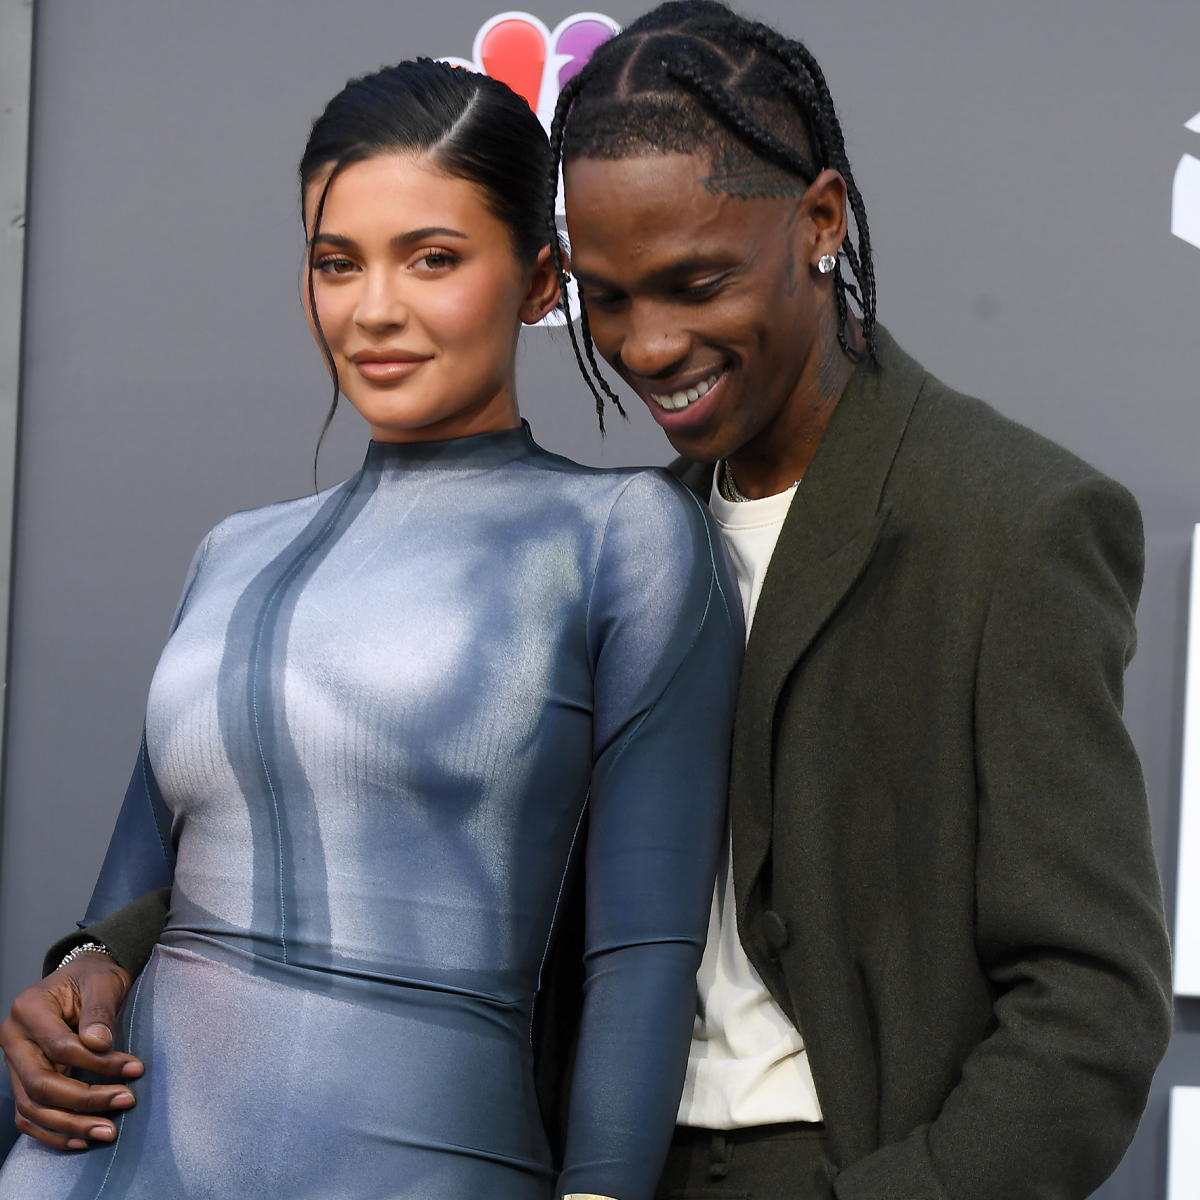 Kylie Jenner Shares New Glimpse of Her and Travis Scott’s Baby Boy